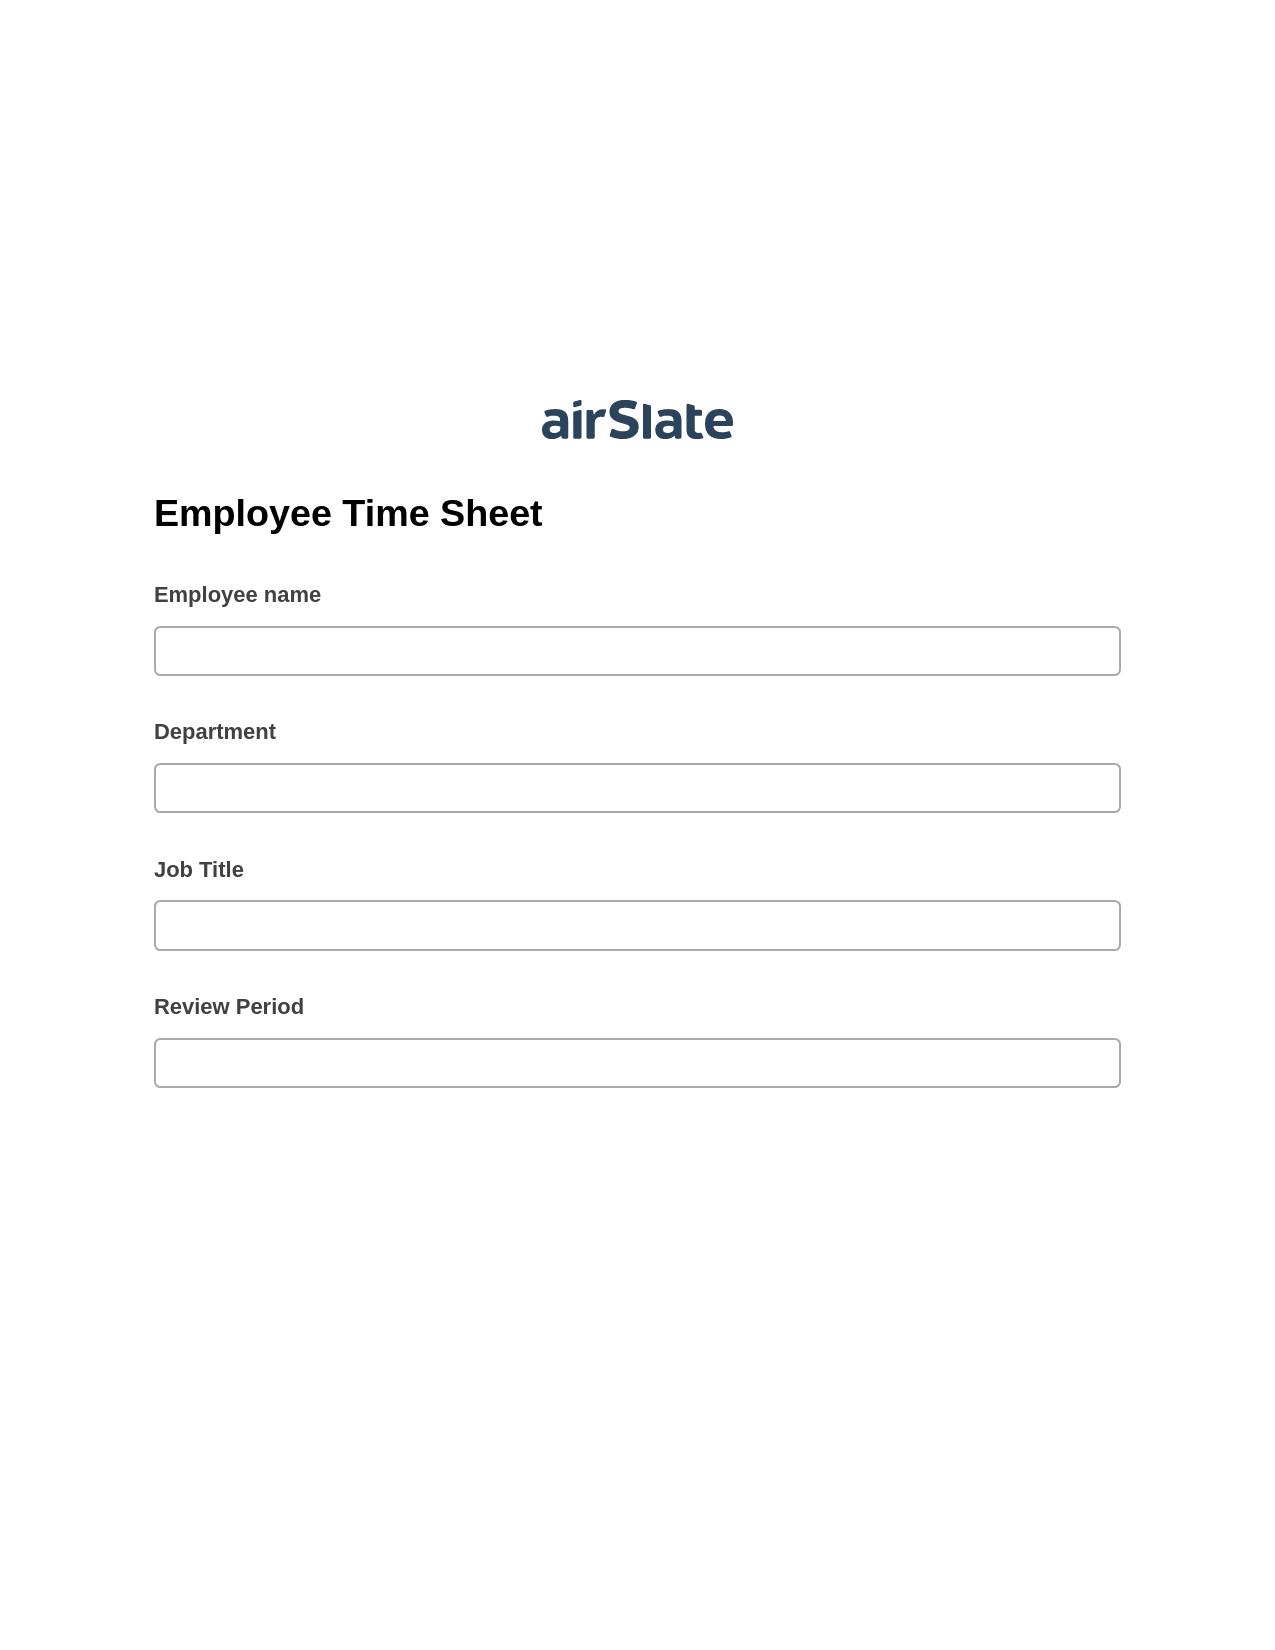 Multirole Employee Time Sheet Prefill from NetSuite records, Slack Notification Bot, Archive to Dropbox Bot